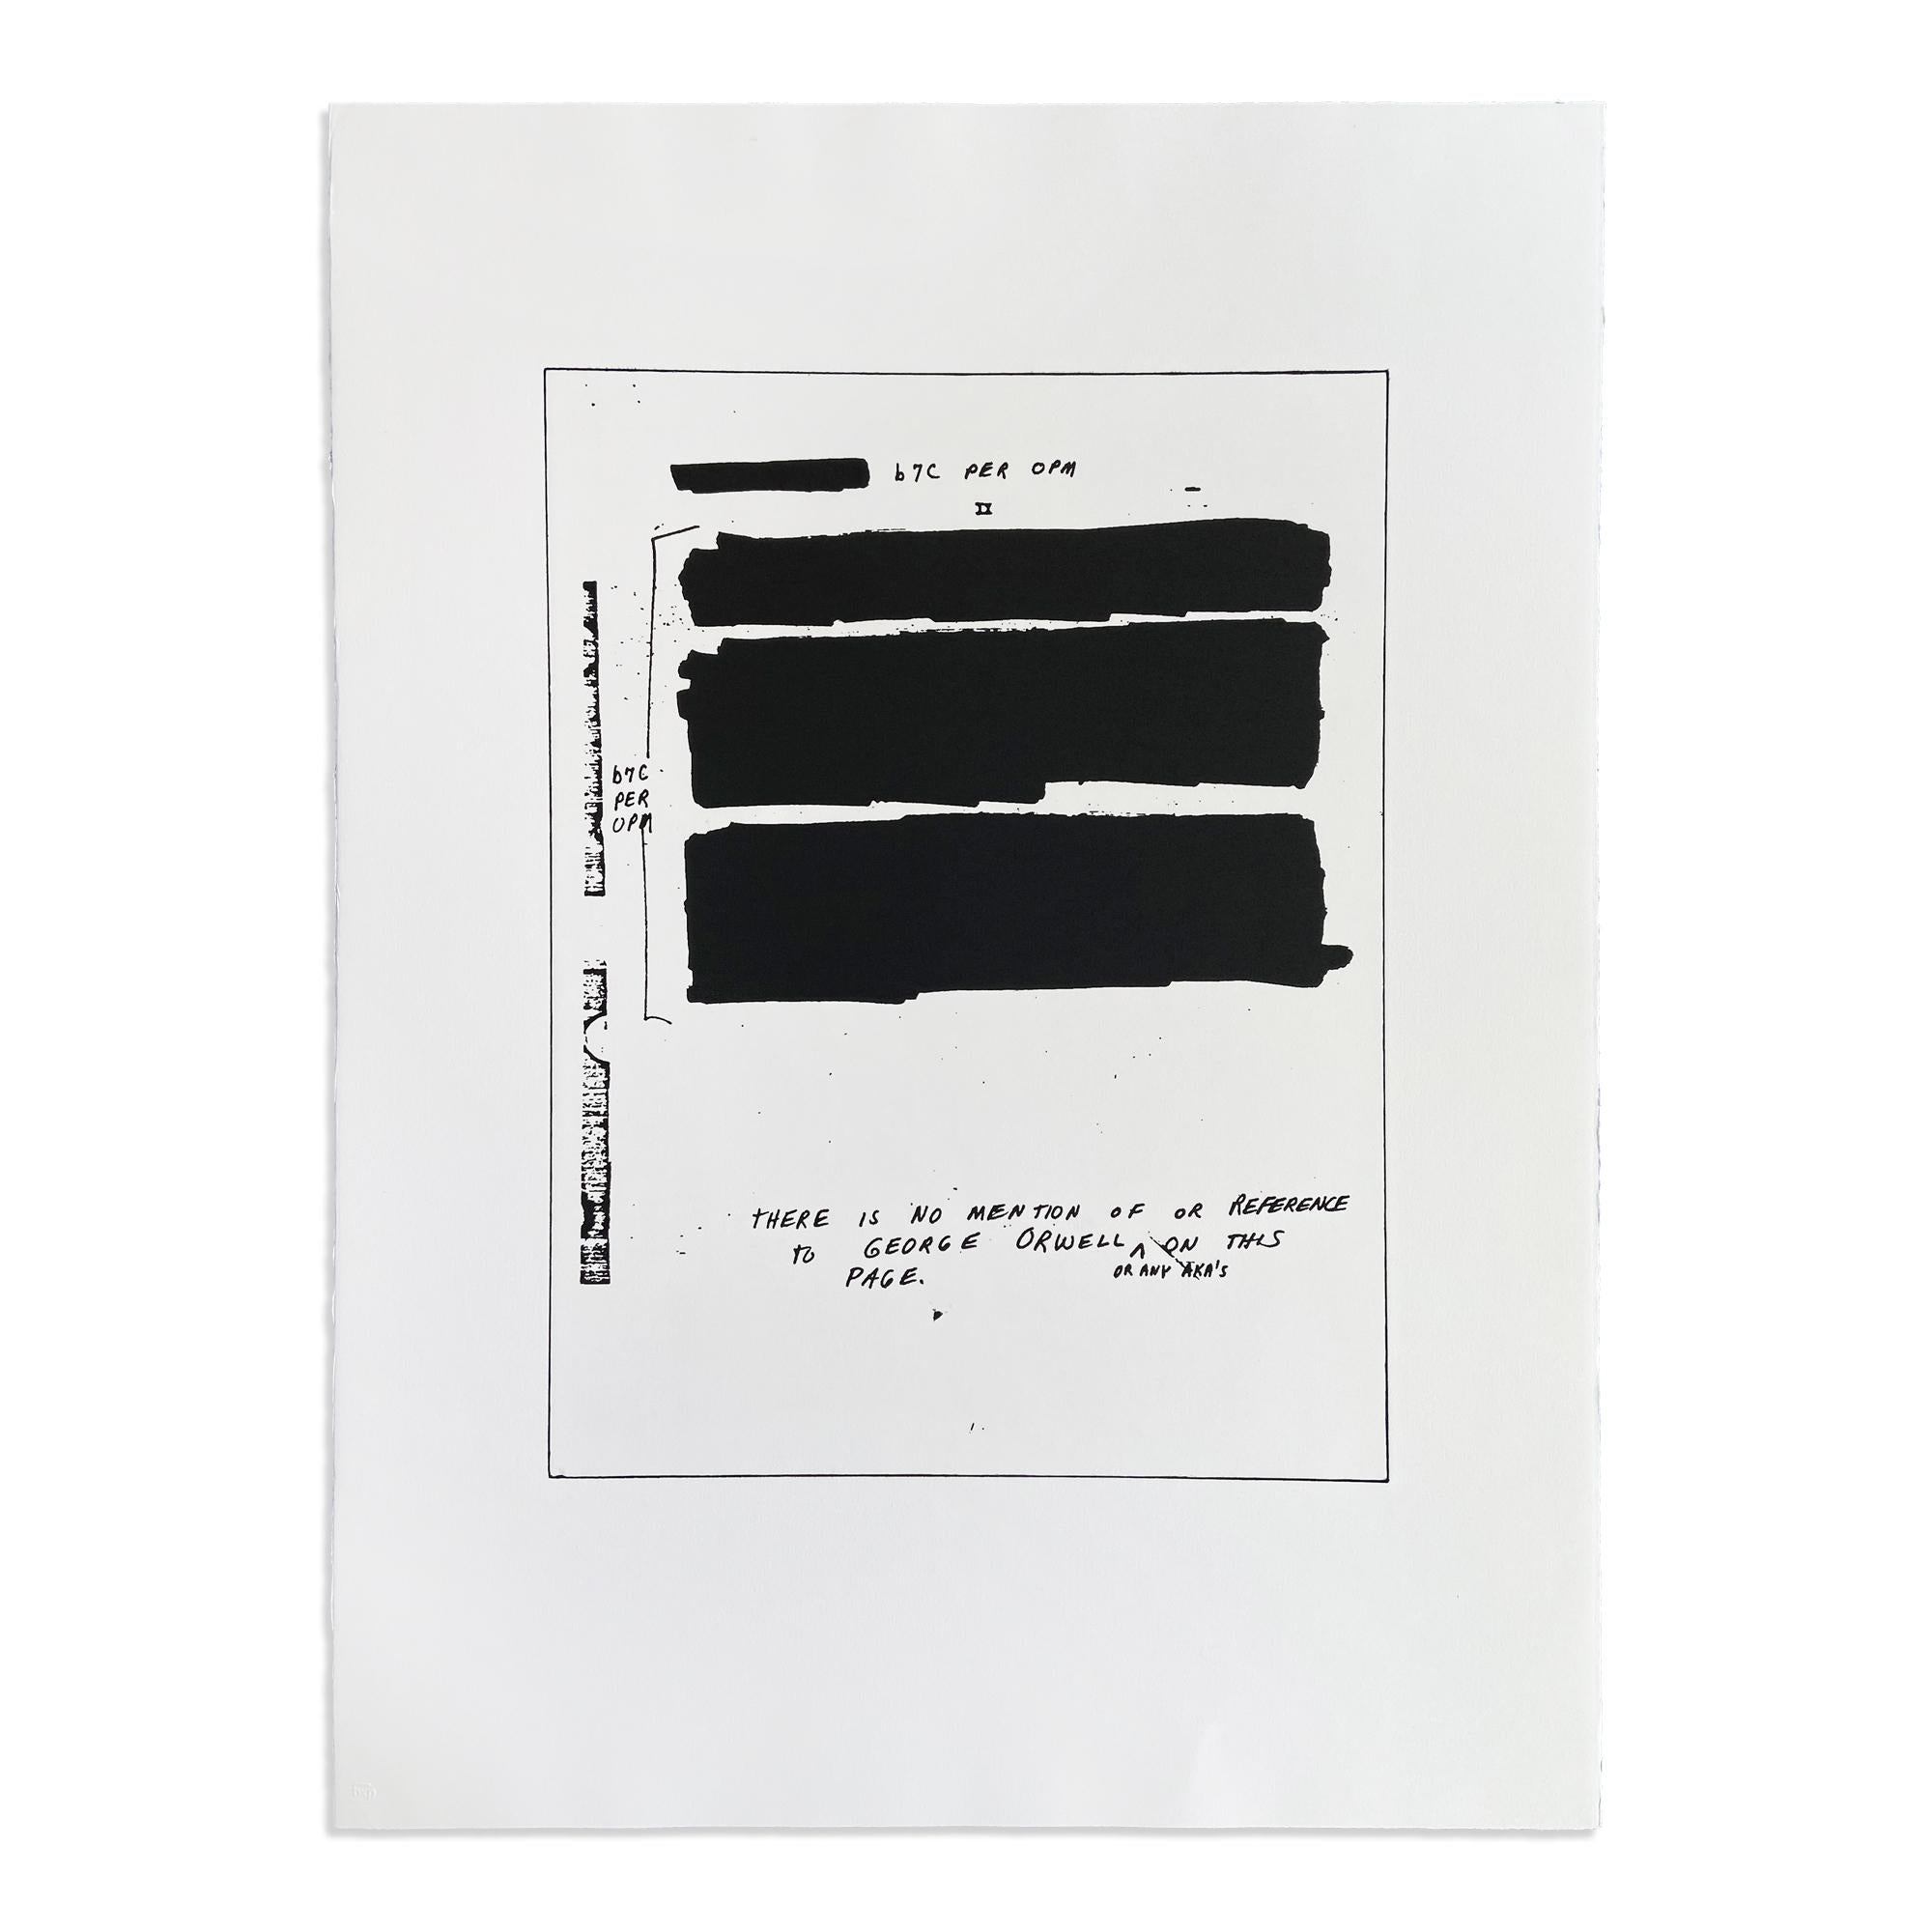 Jenny Holzer (American, b. 1950)
AKA, 2006
Medium: Set of five etchings, on Magnani Pescia paper (with title page, sheets loose, in original black silk-covered portfolio case)
Dimensions: 75.6 x 56.3 cm (29 3/4 x 22 1/8 in)
Edition of 40: Hand